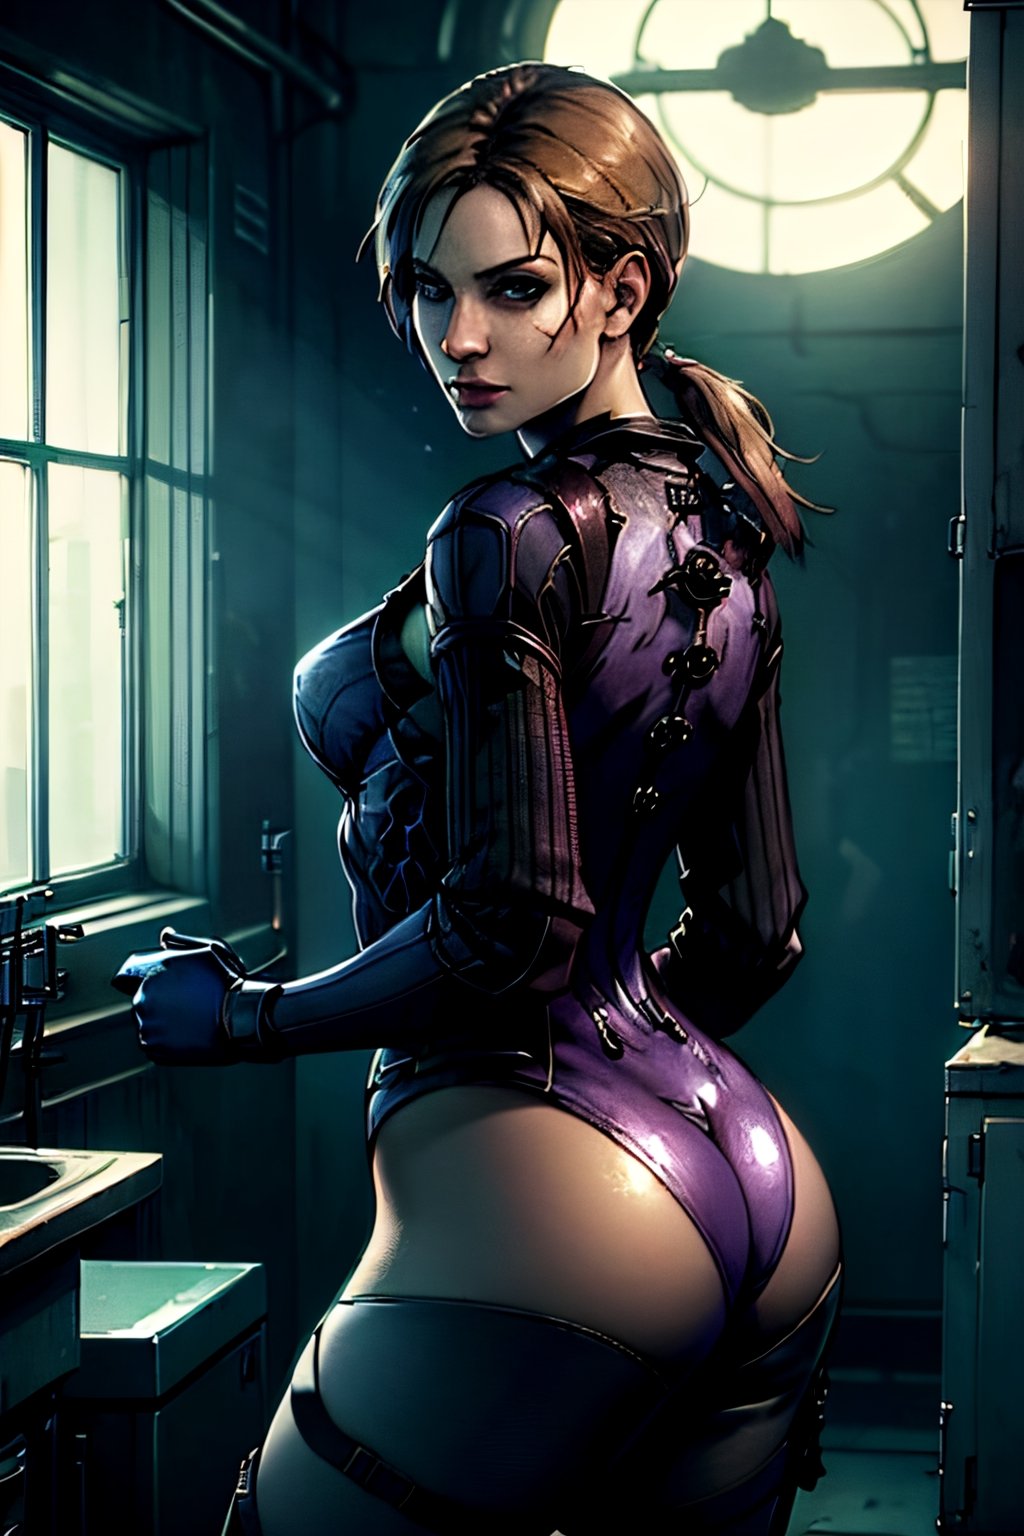 jill valentine (resident evil 5), facial portrait, sexy stare, smirked, inside lab, umbrella signs, zombies in the window, butt shot, guns